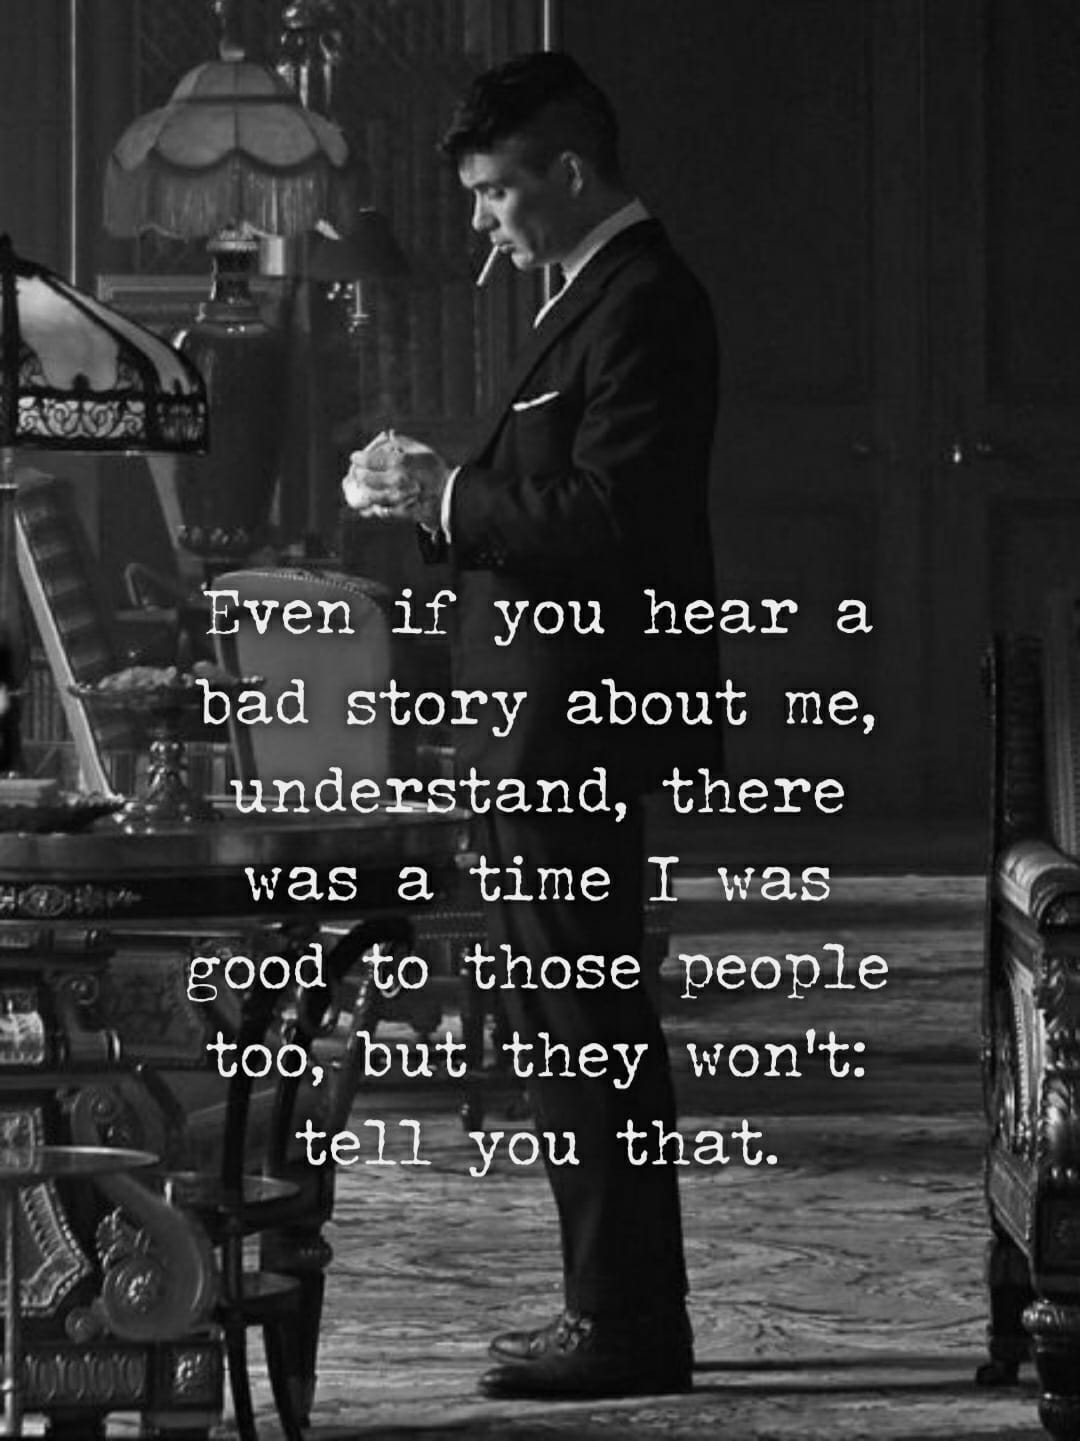 Even if you hear a bad story about me, there was a time I was good to them, but they won’t tell you that.